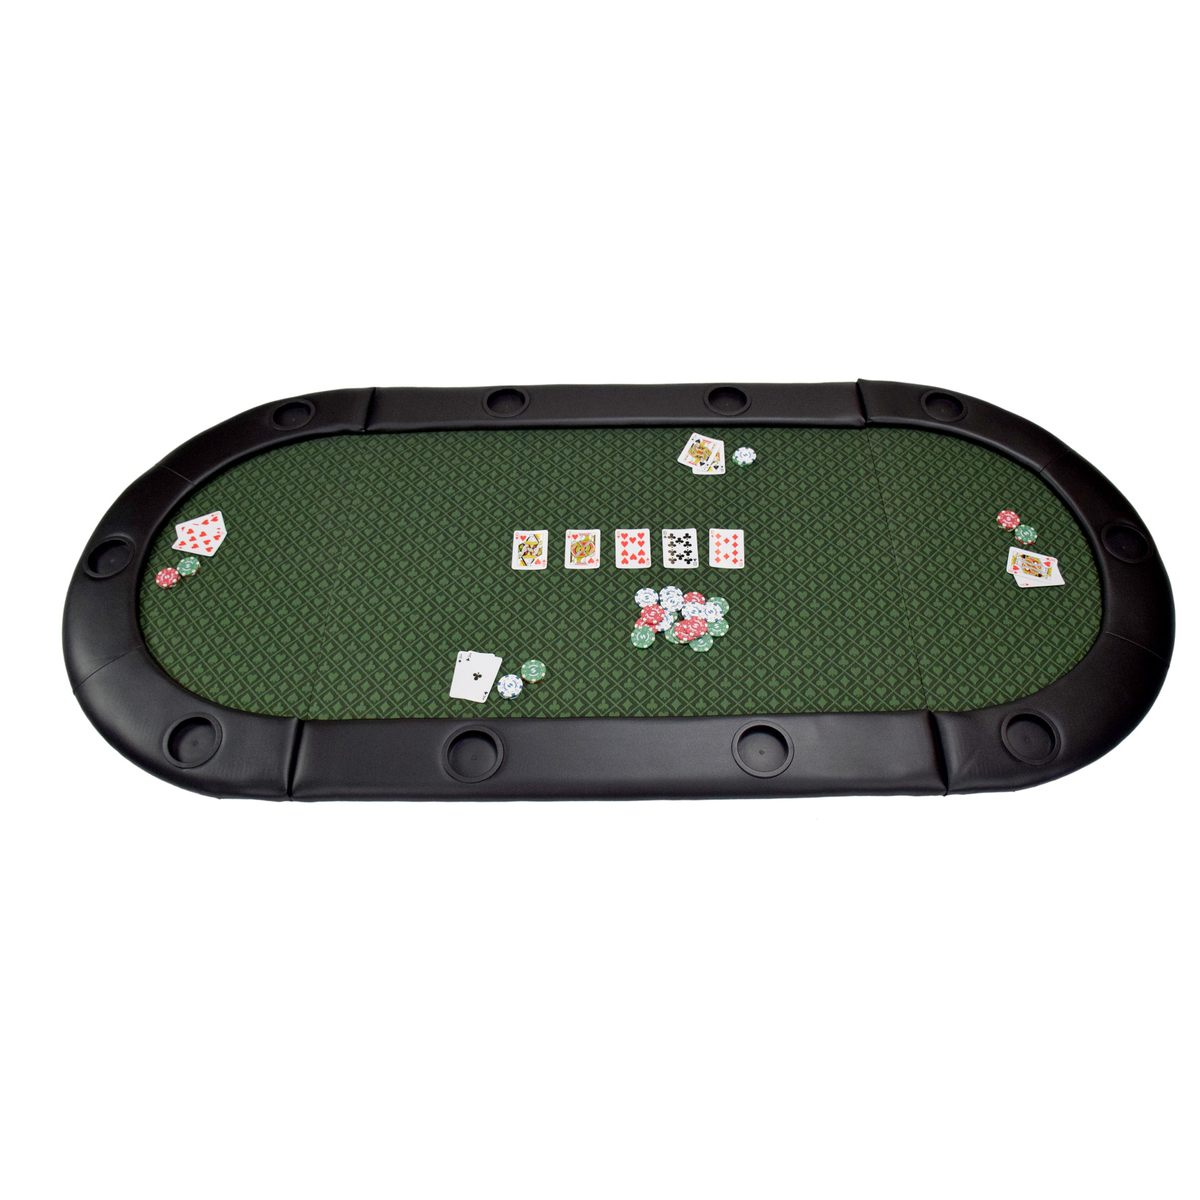 North Tabletop Poker Table 10 personnes Vert